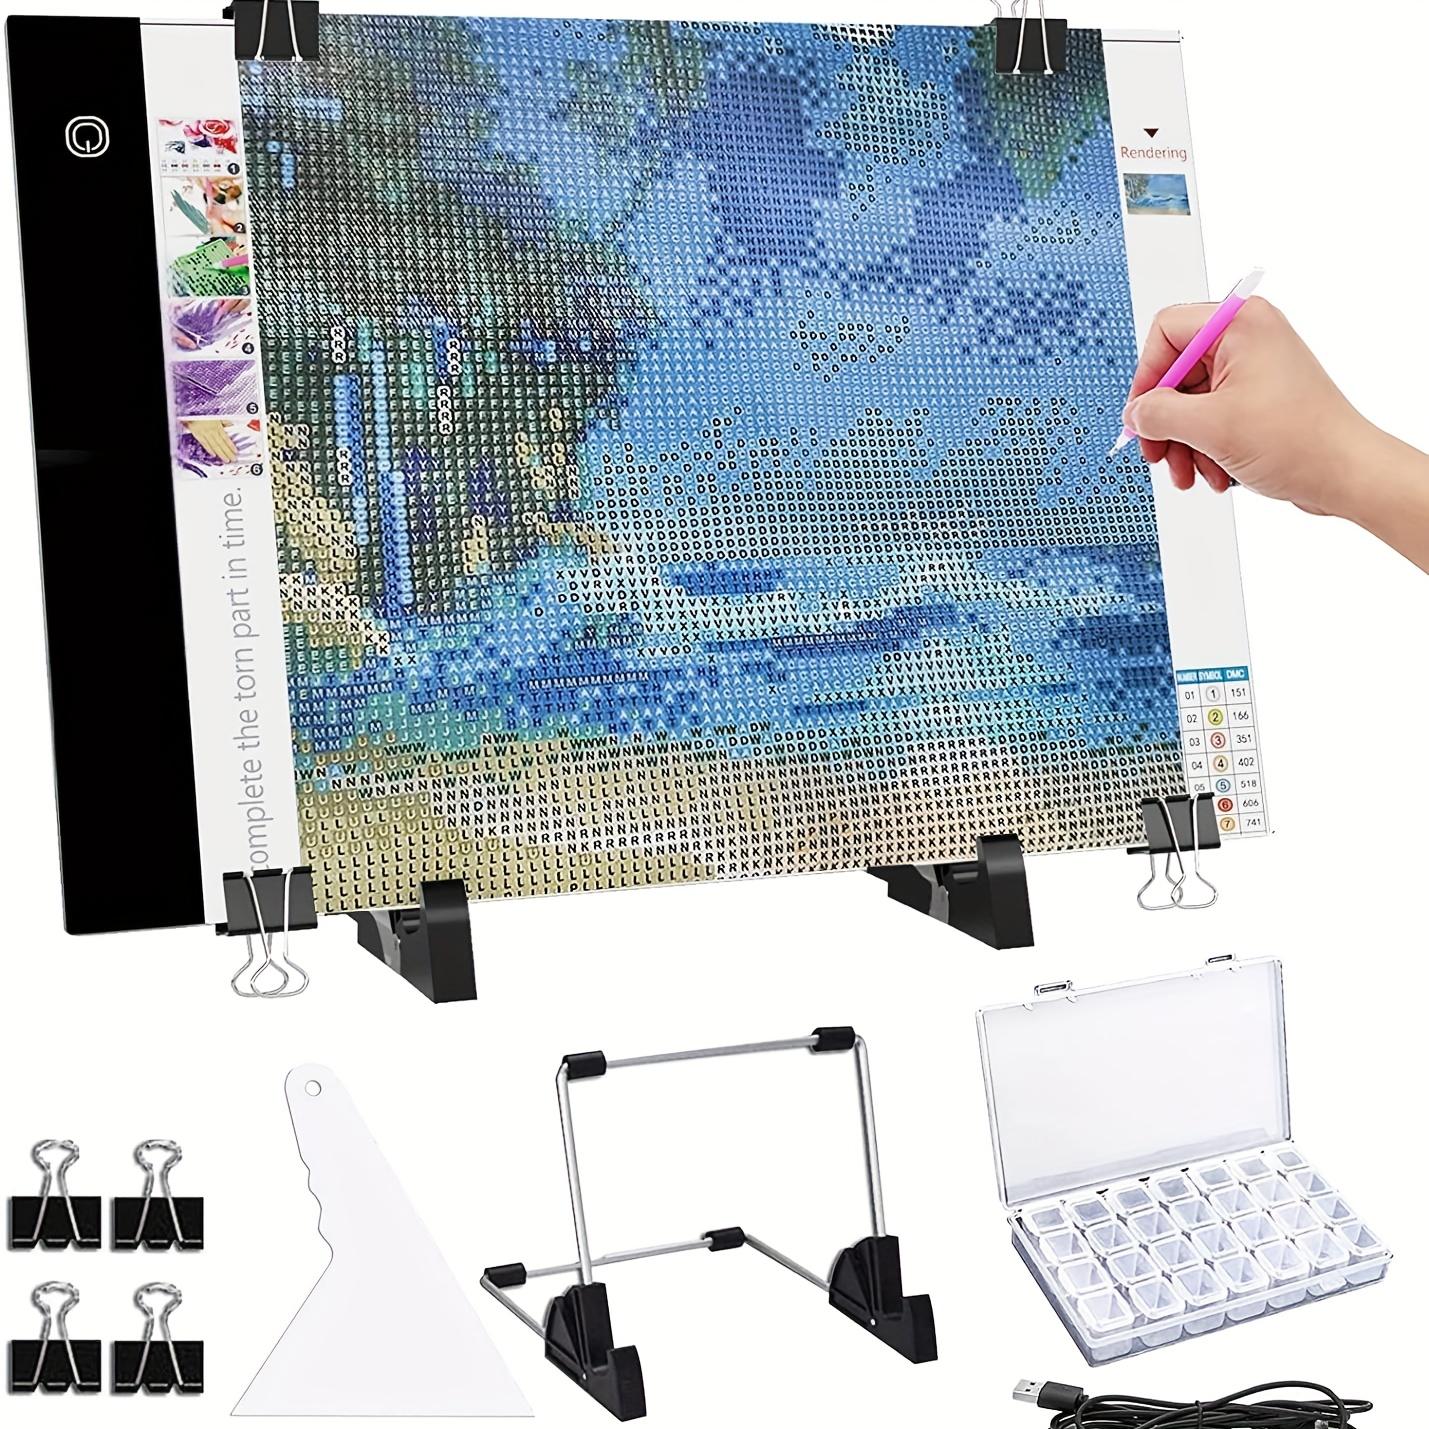 NEW A4 Drawing Tablet Board USB Powered Dimmable LED Light Pad For